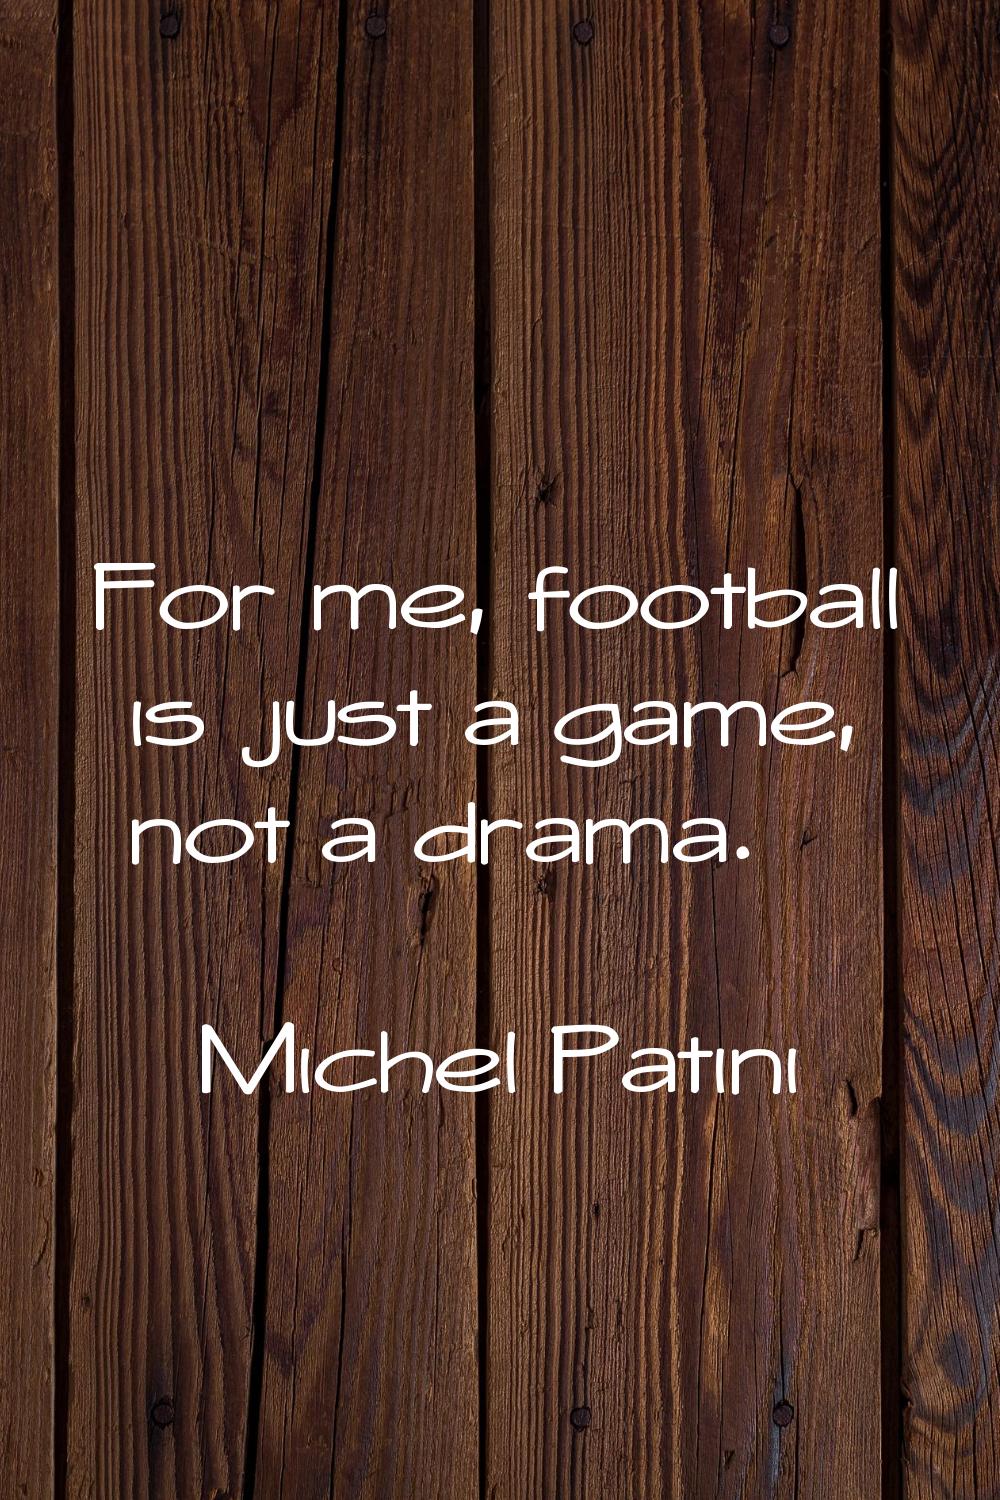 For me, football is just a game, not a drama.